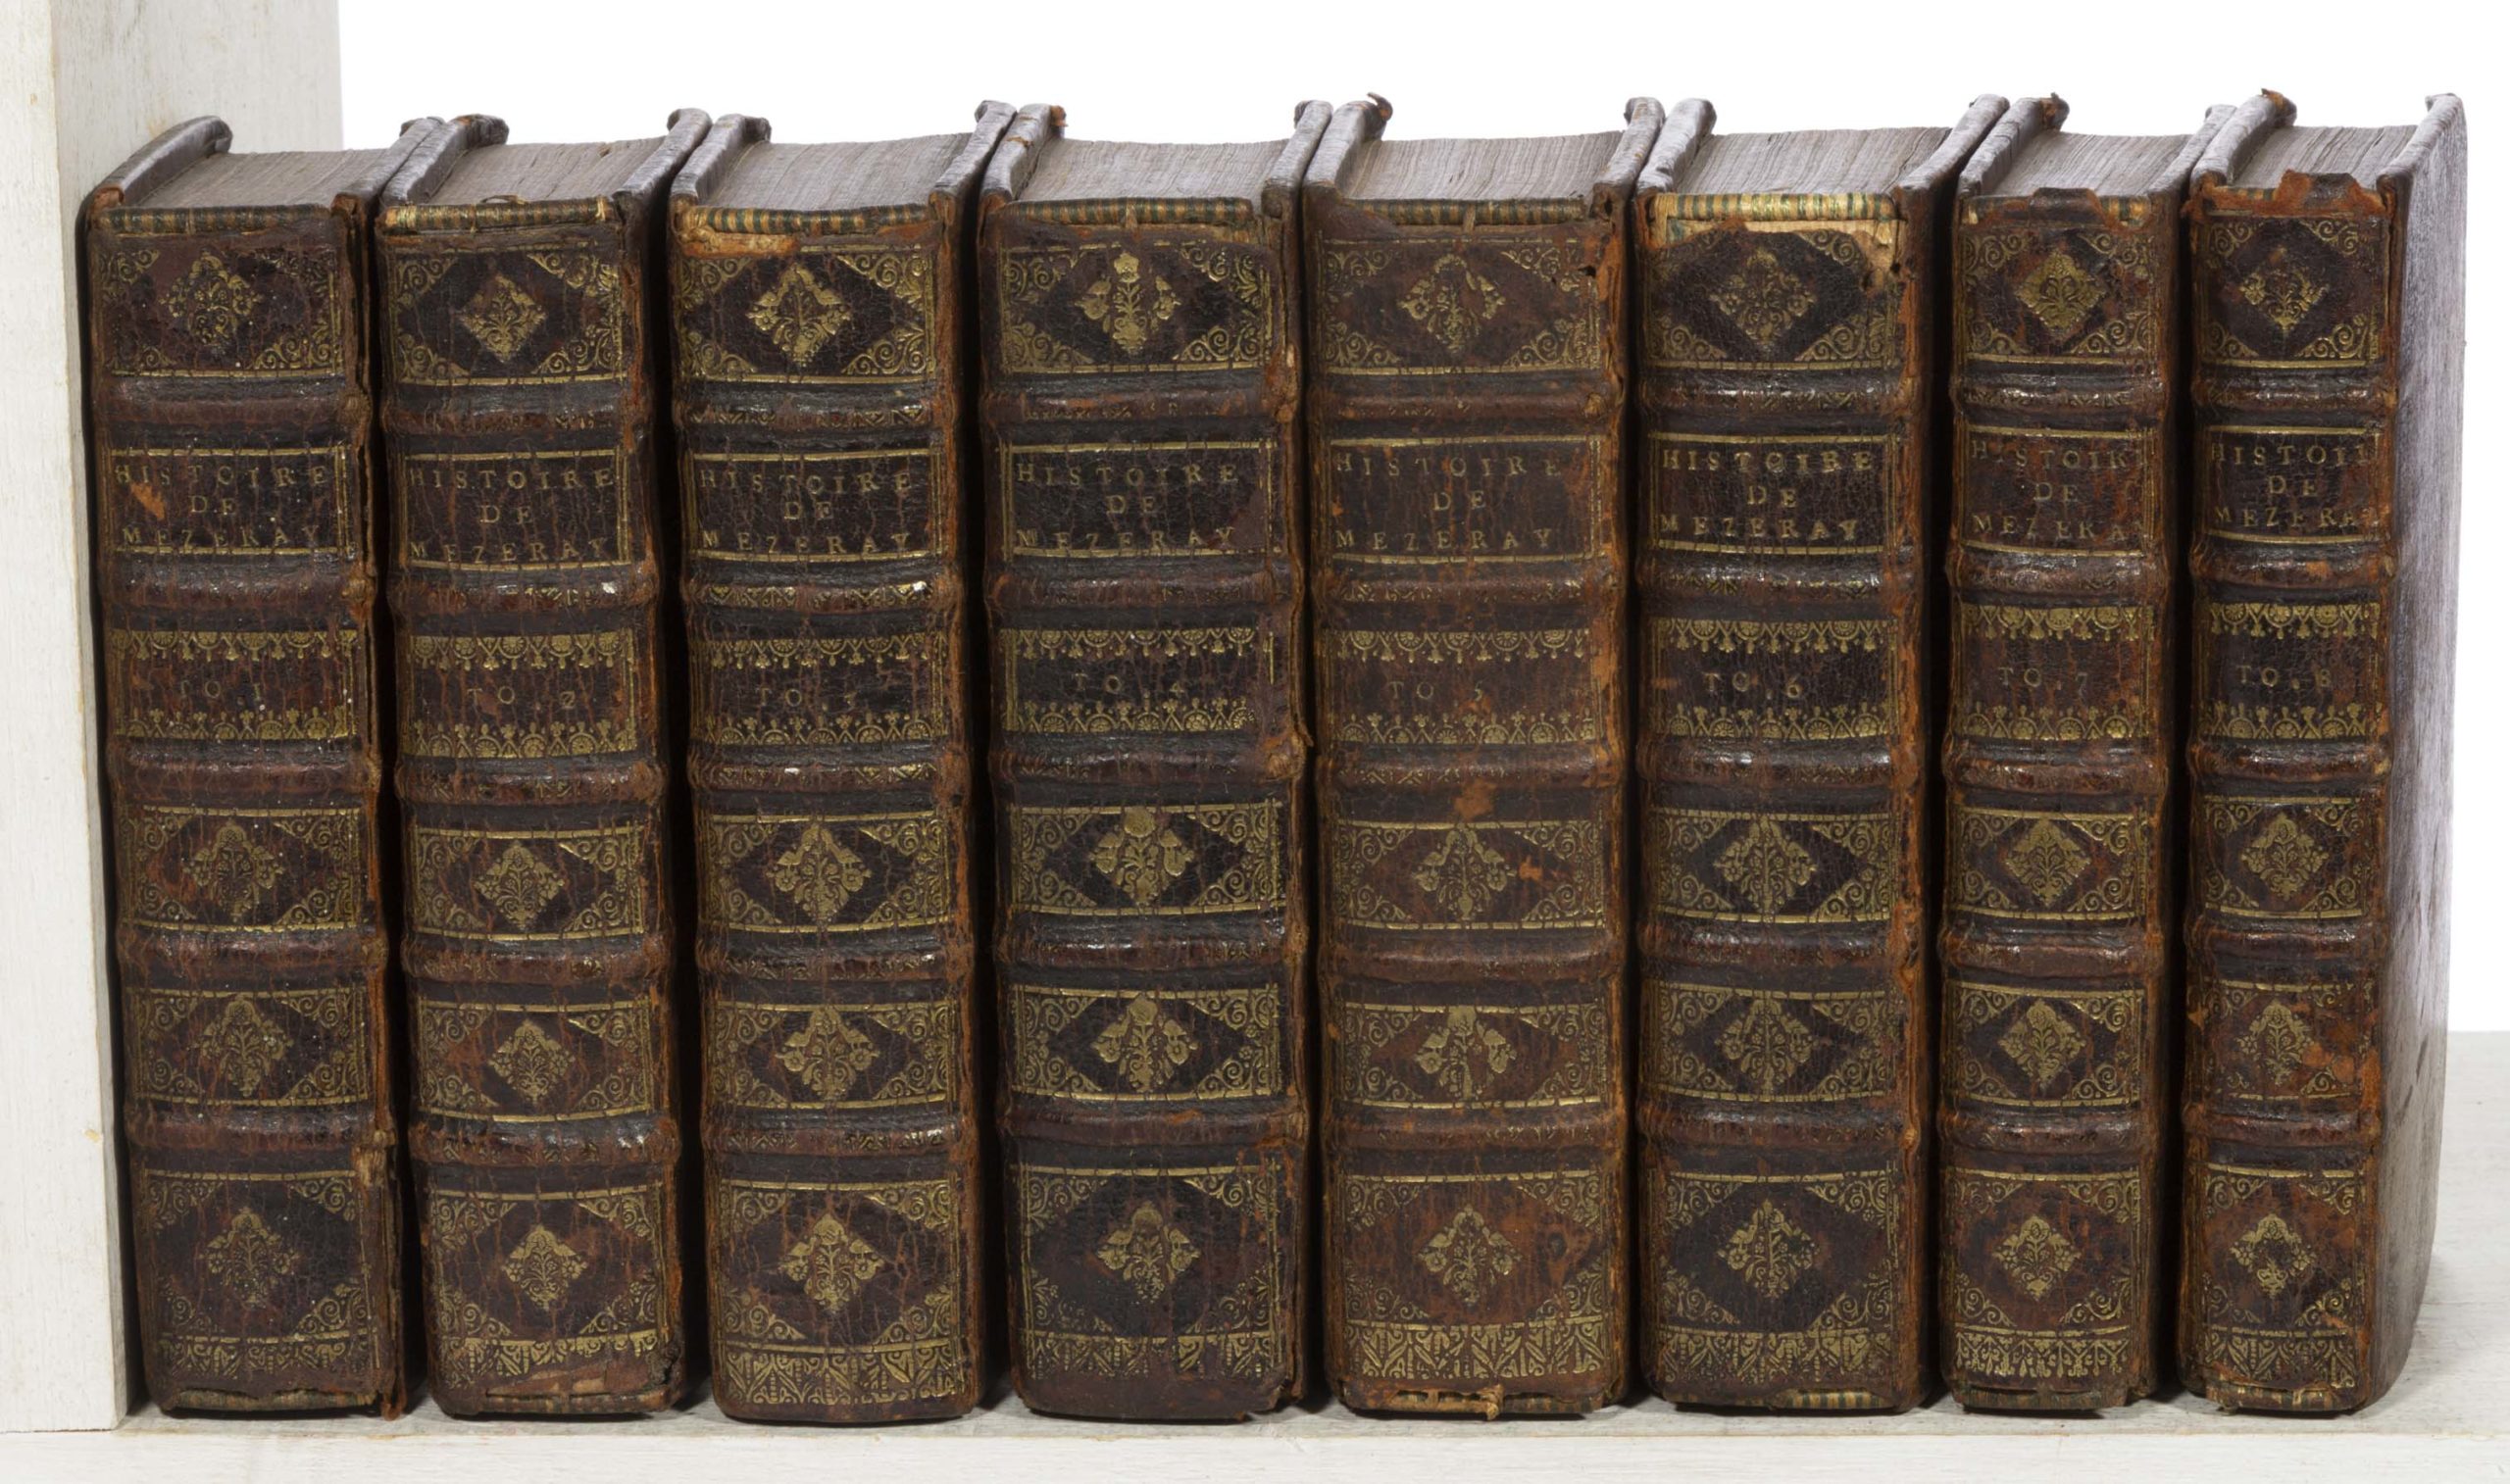 ANTIQUARIAN FRANCE LANGUAGE HISTORICAL EIGHT-VOLUME SET, FROM LORD DUNMORE’S LIBRARY,